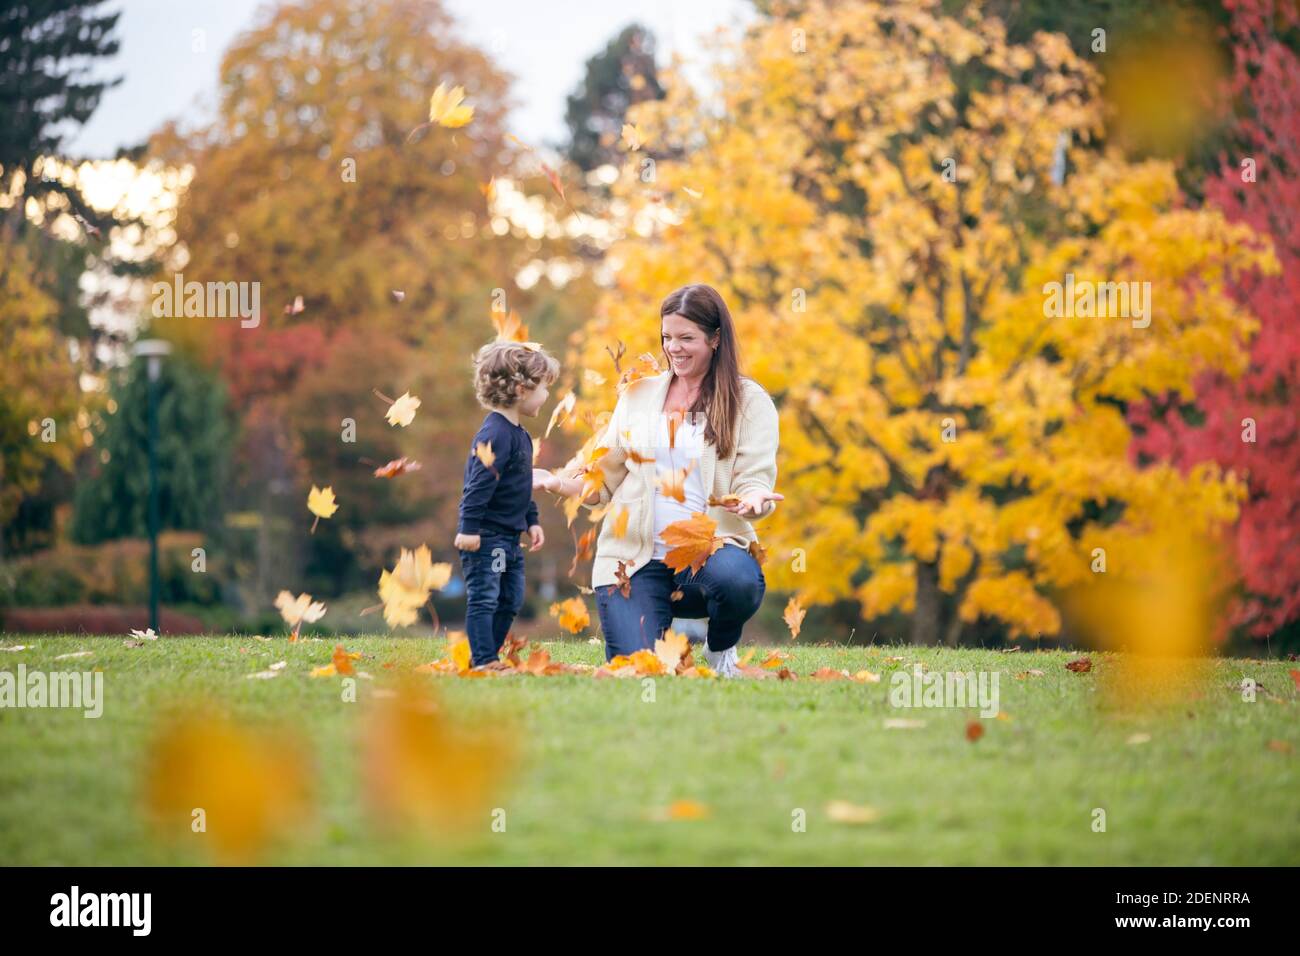 A young mother and her son are playing in the park against beautiful fall colors illustrating the happiness and joy of family Stock Photo